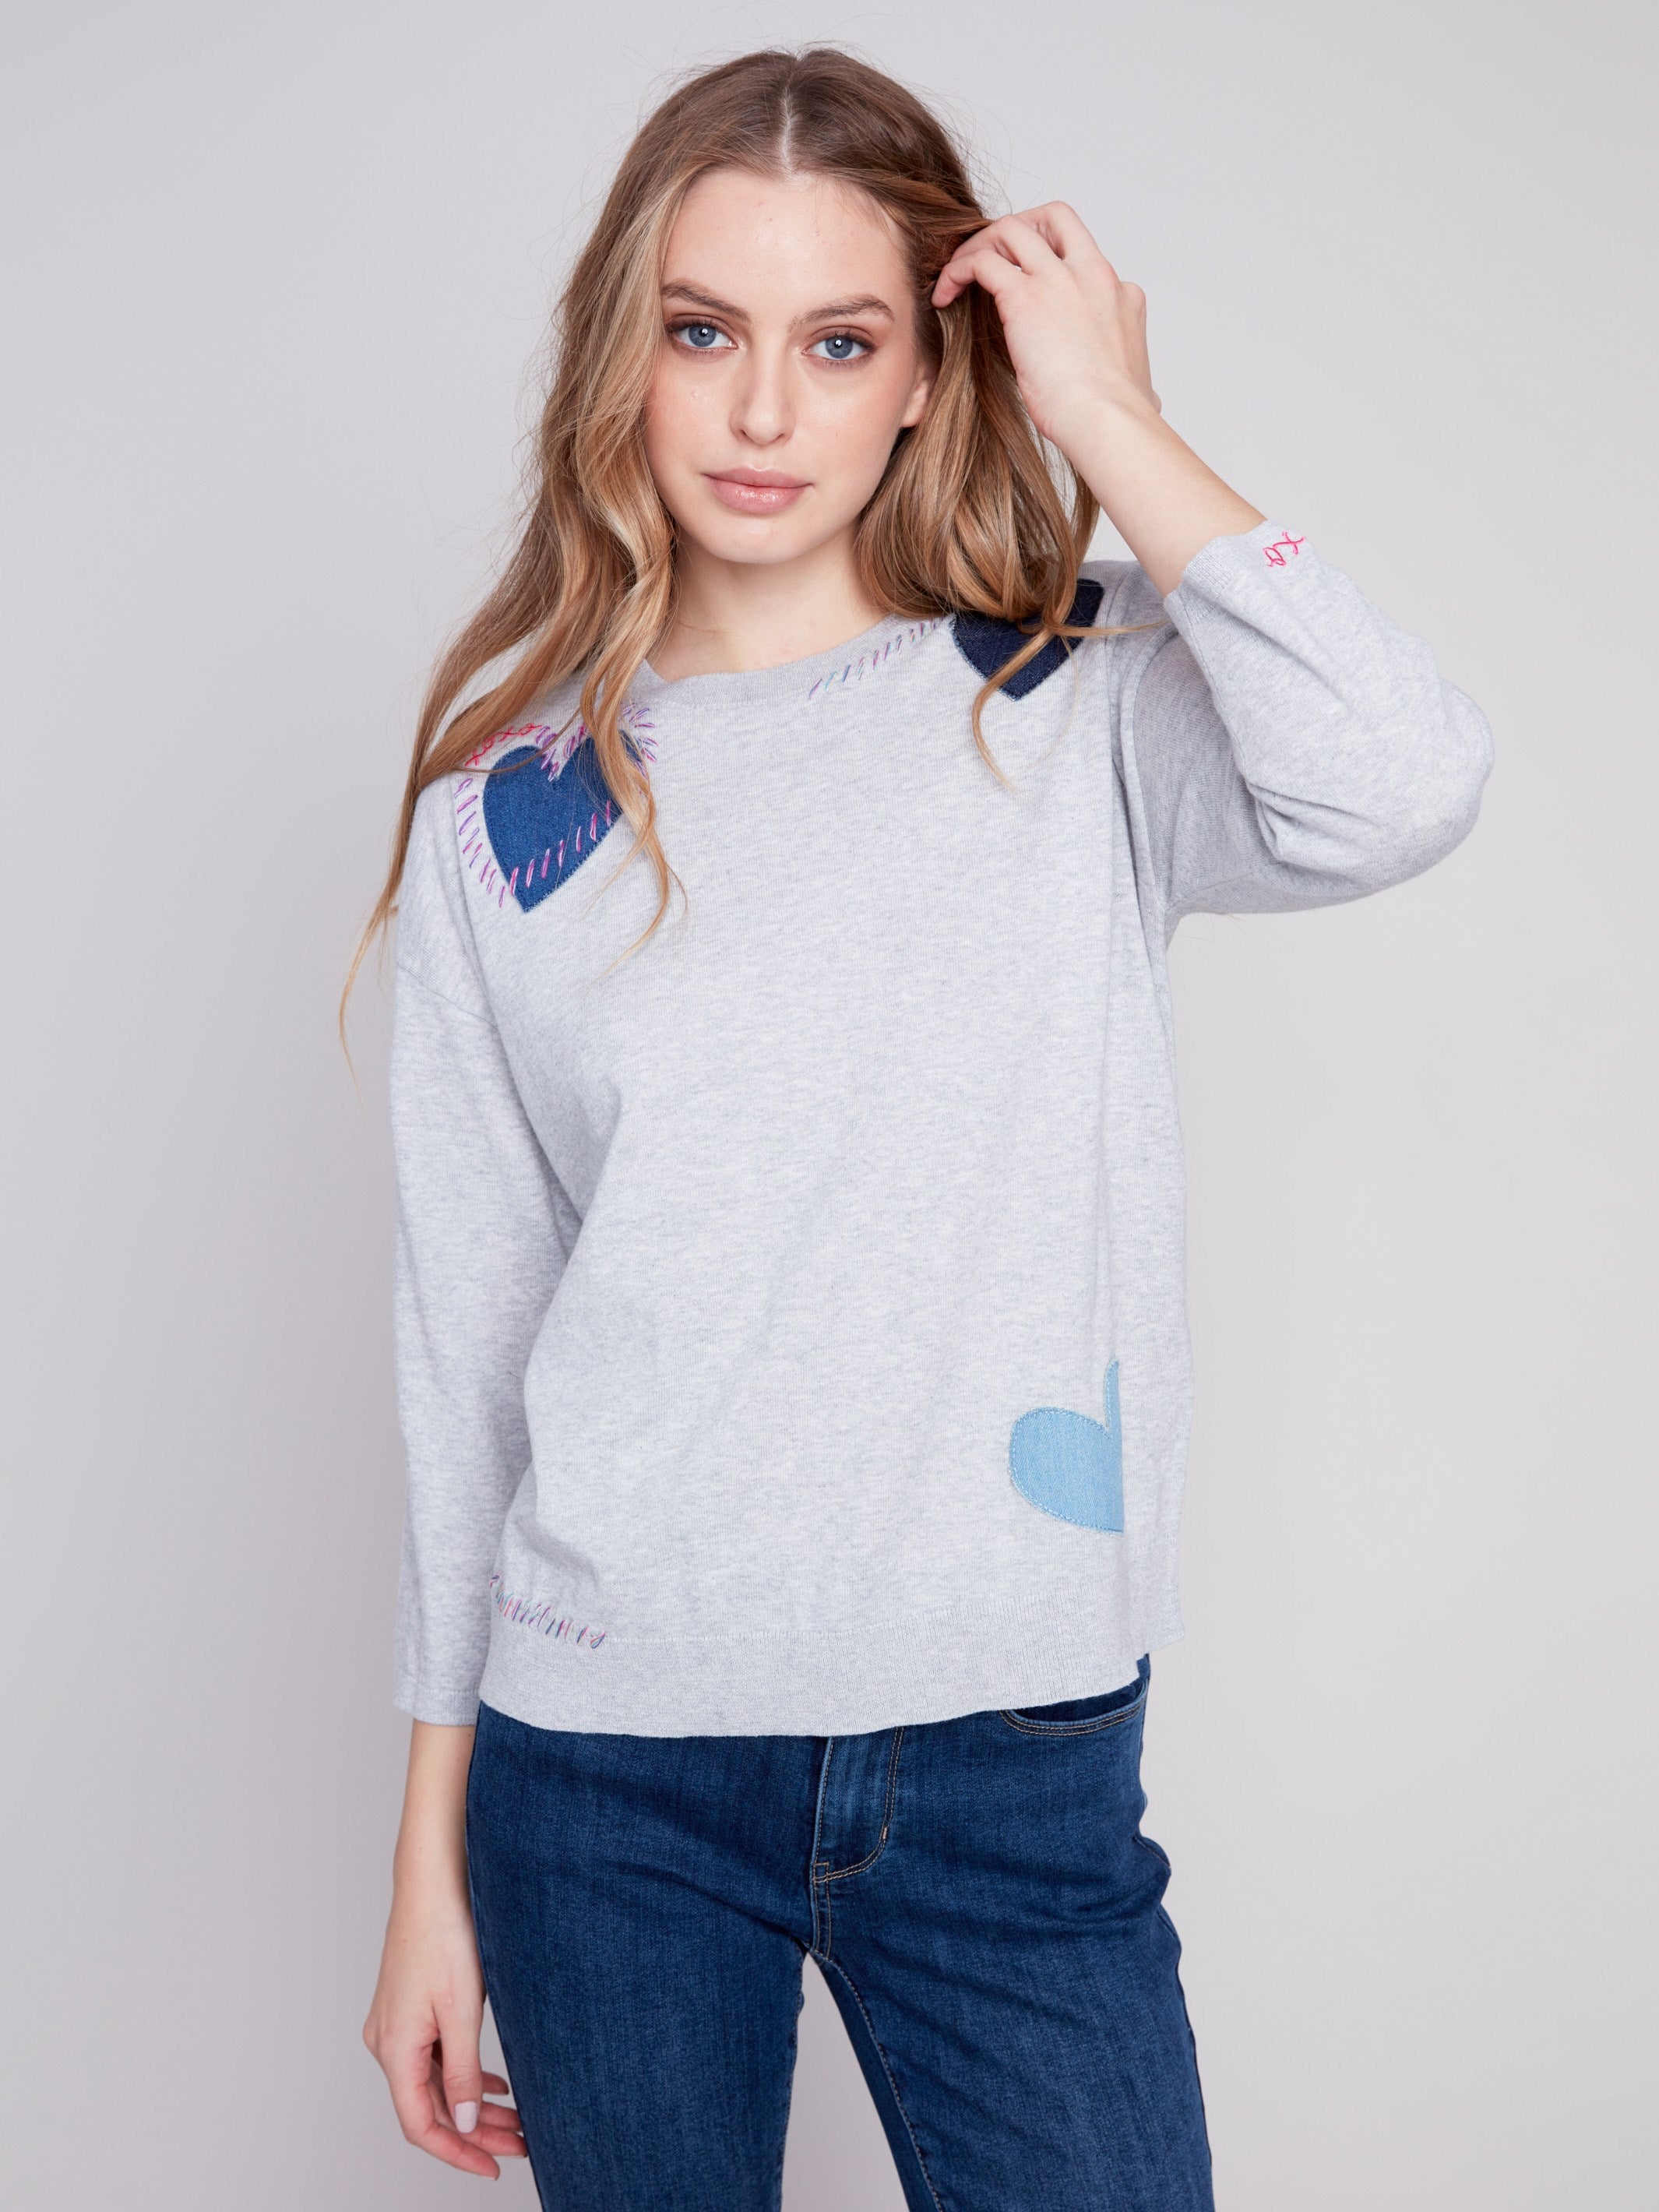 Charlie B Cotton Sweater with Heart Patches - Grey - Image 2